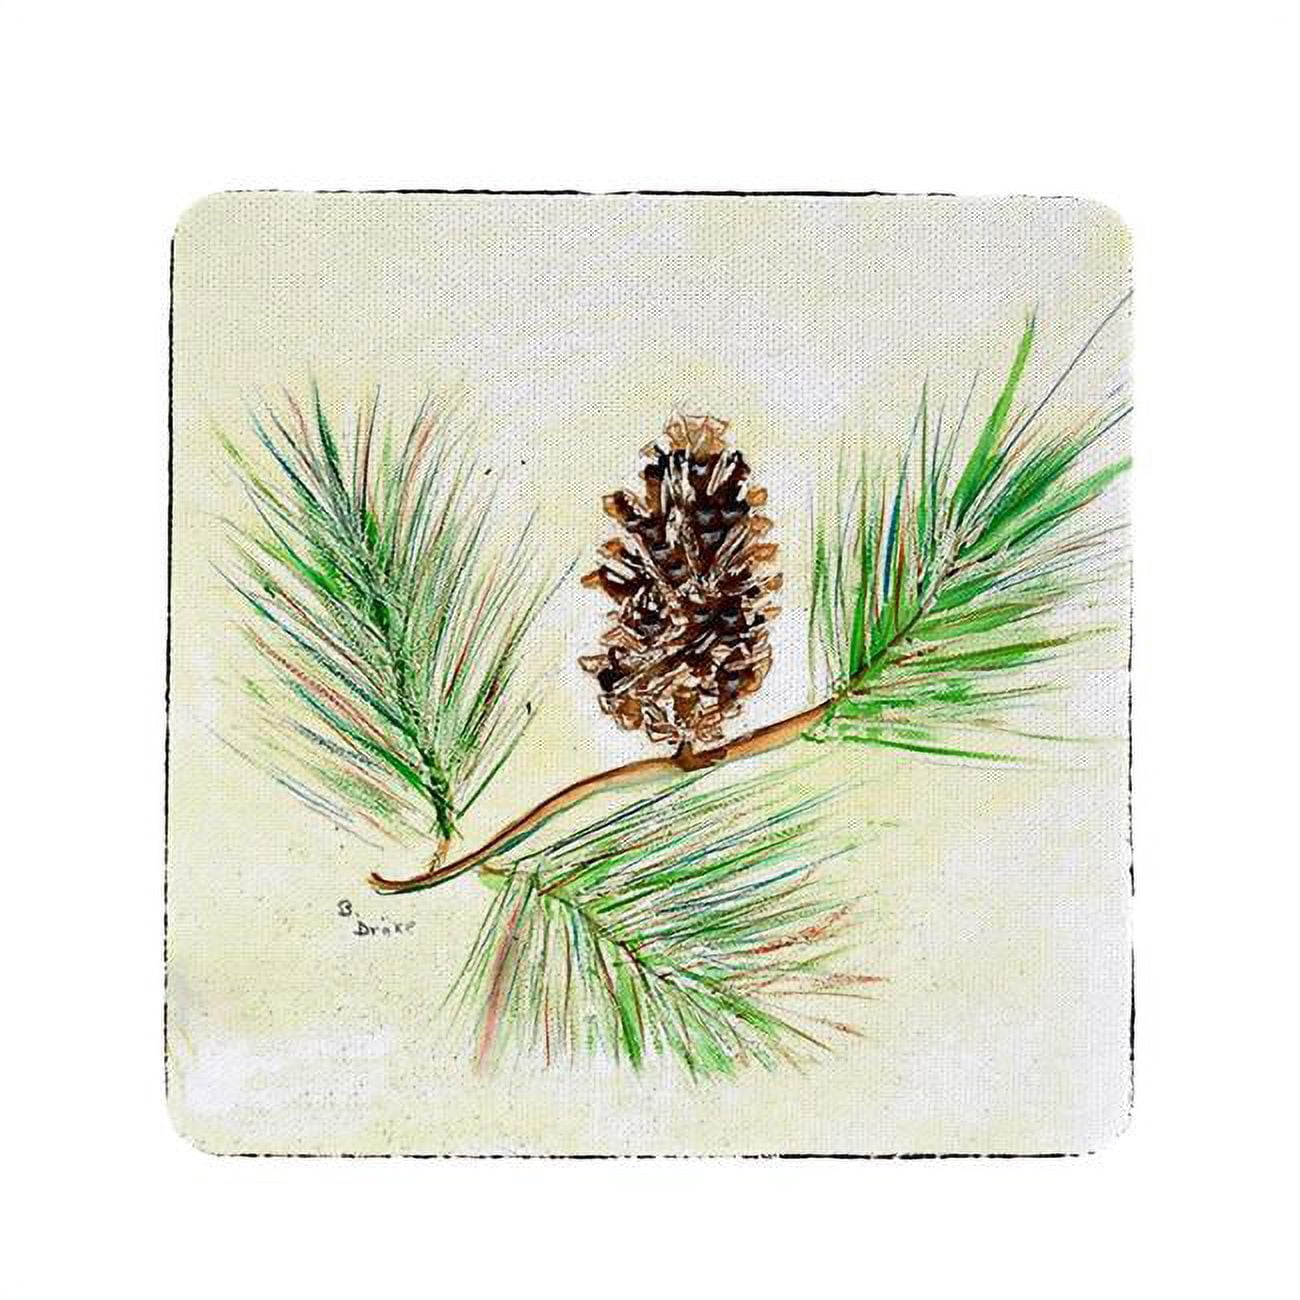 Ct161 4 X 4 In. Betsys Pine Cone Coaster - Set Of 4